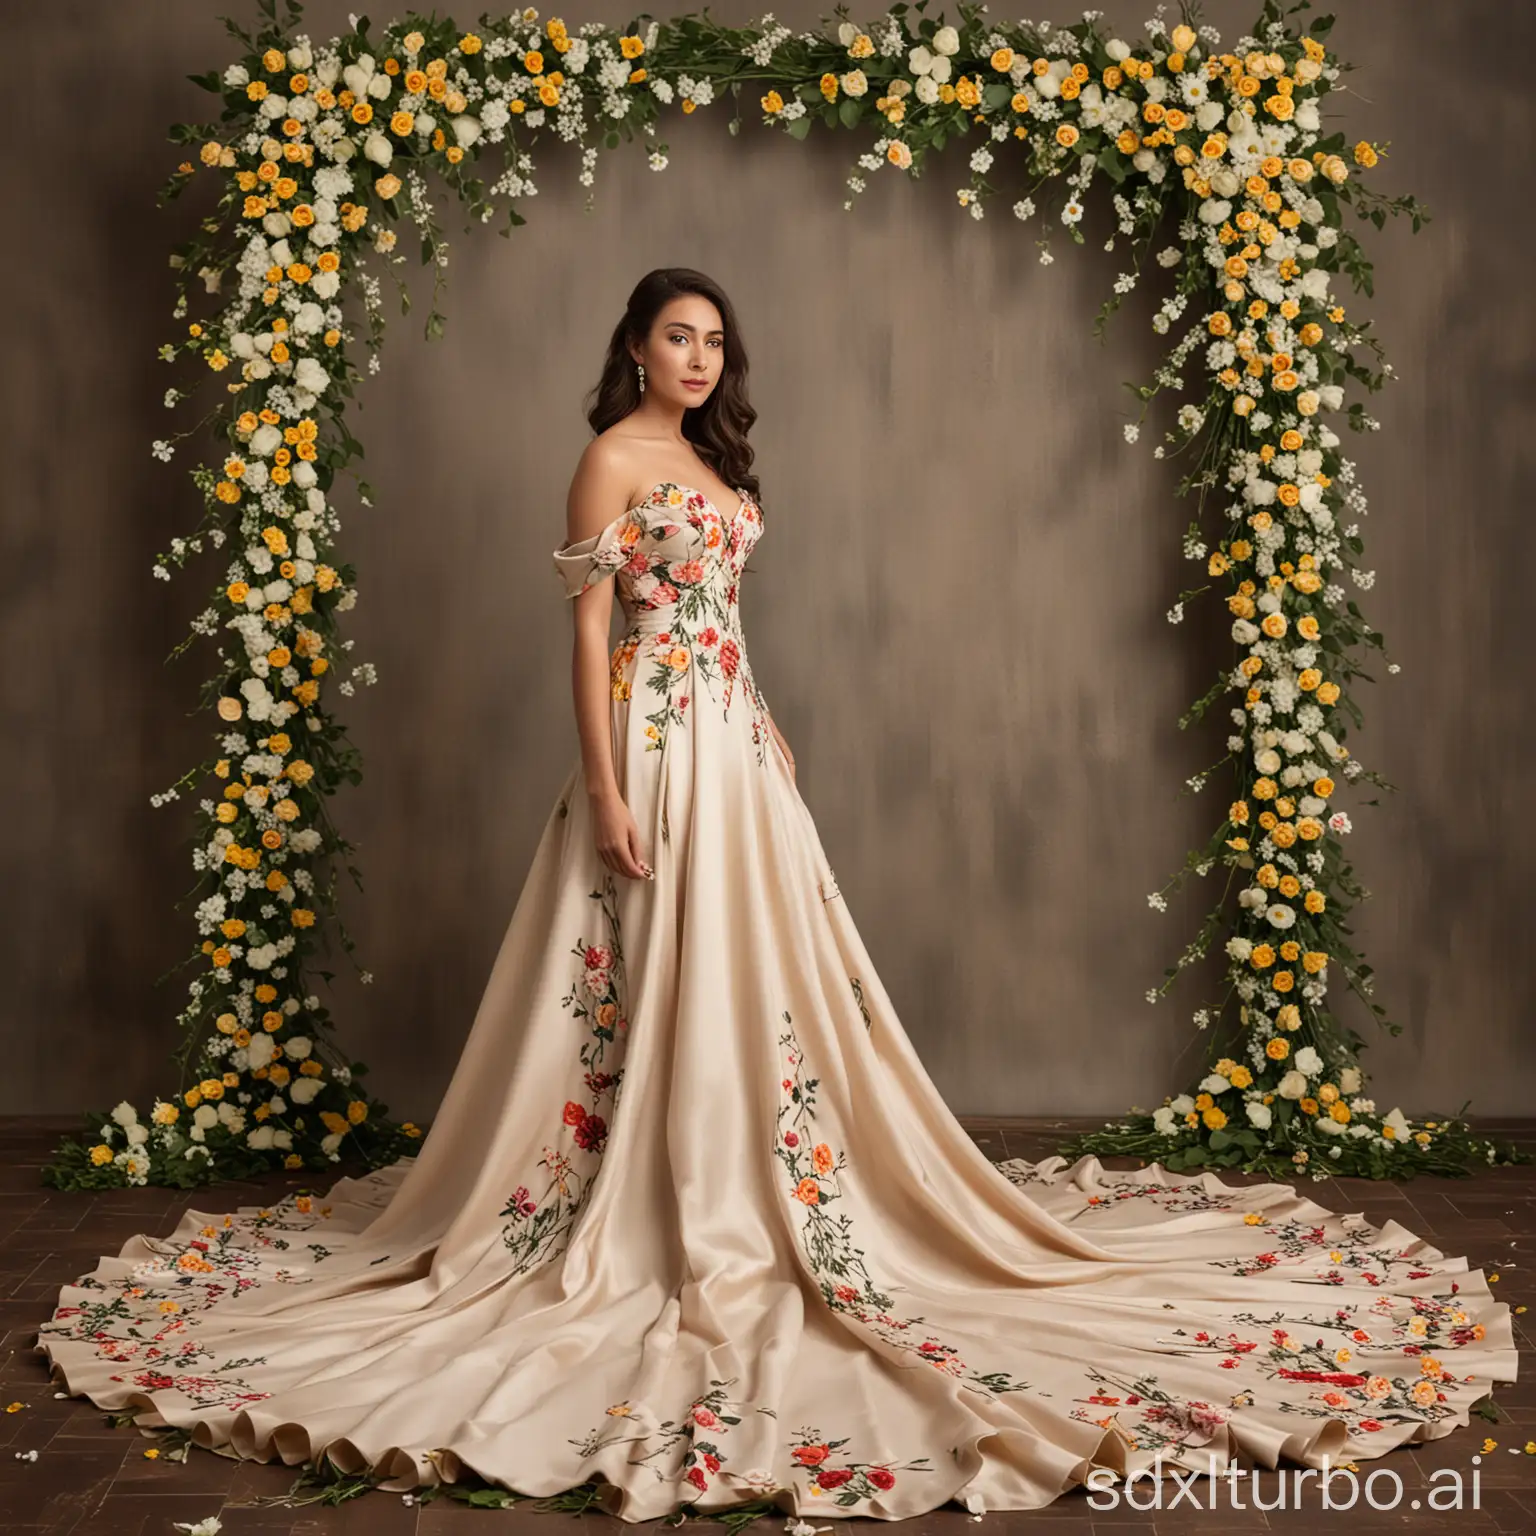 Elegant-Lady-in-Floral-Gown-on-Studio-Backdrop